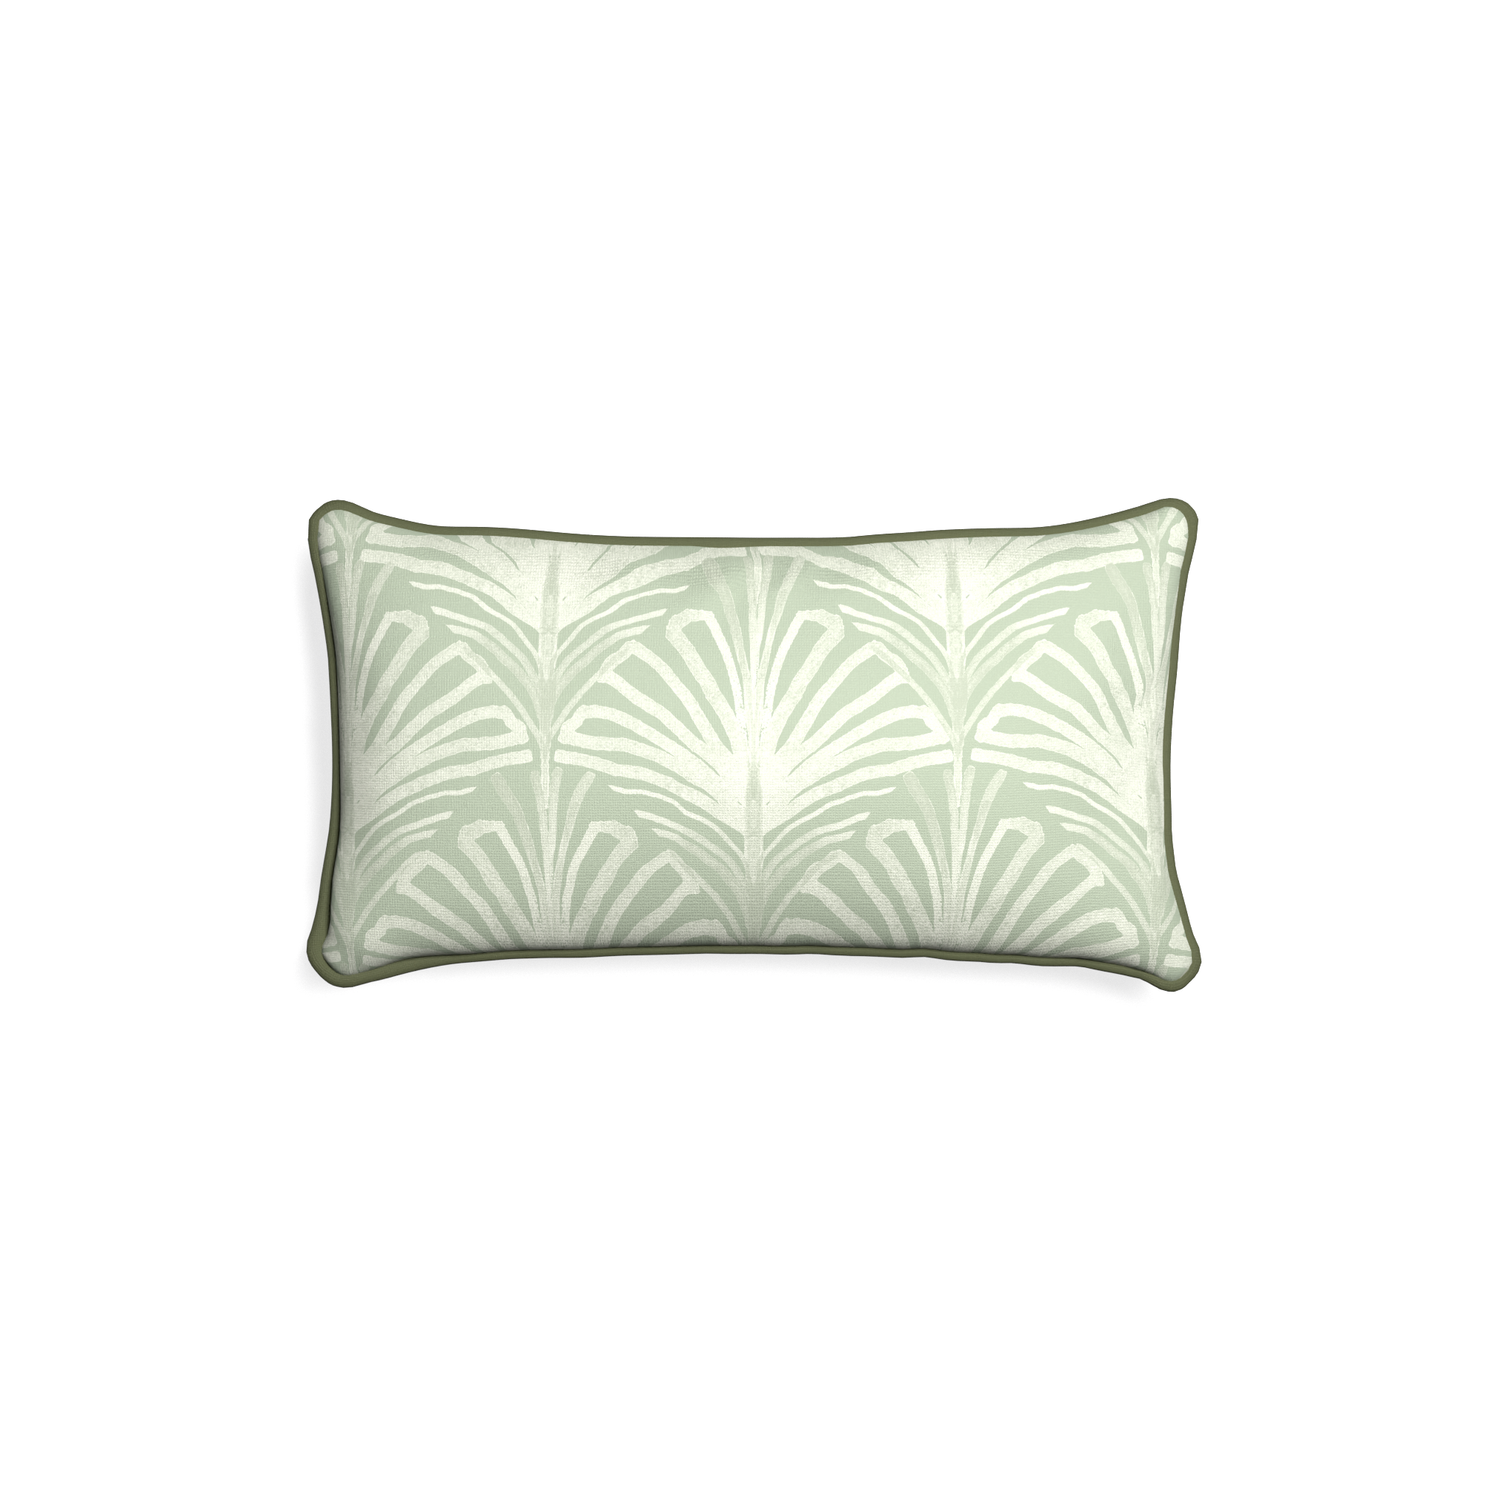 Petite-lumbar suzy sage custom sage green palmpillow with f piping on white background